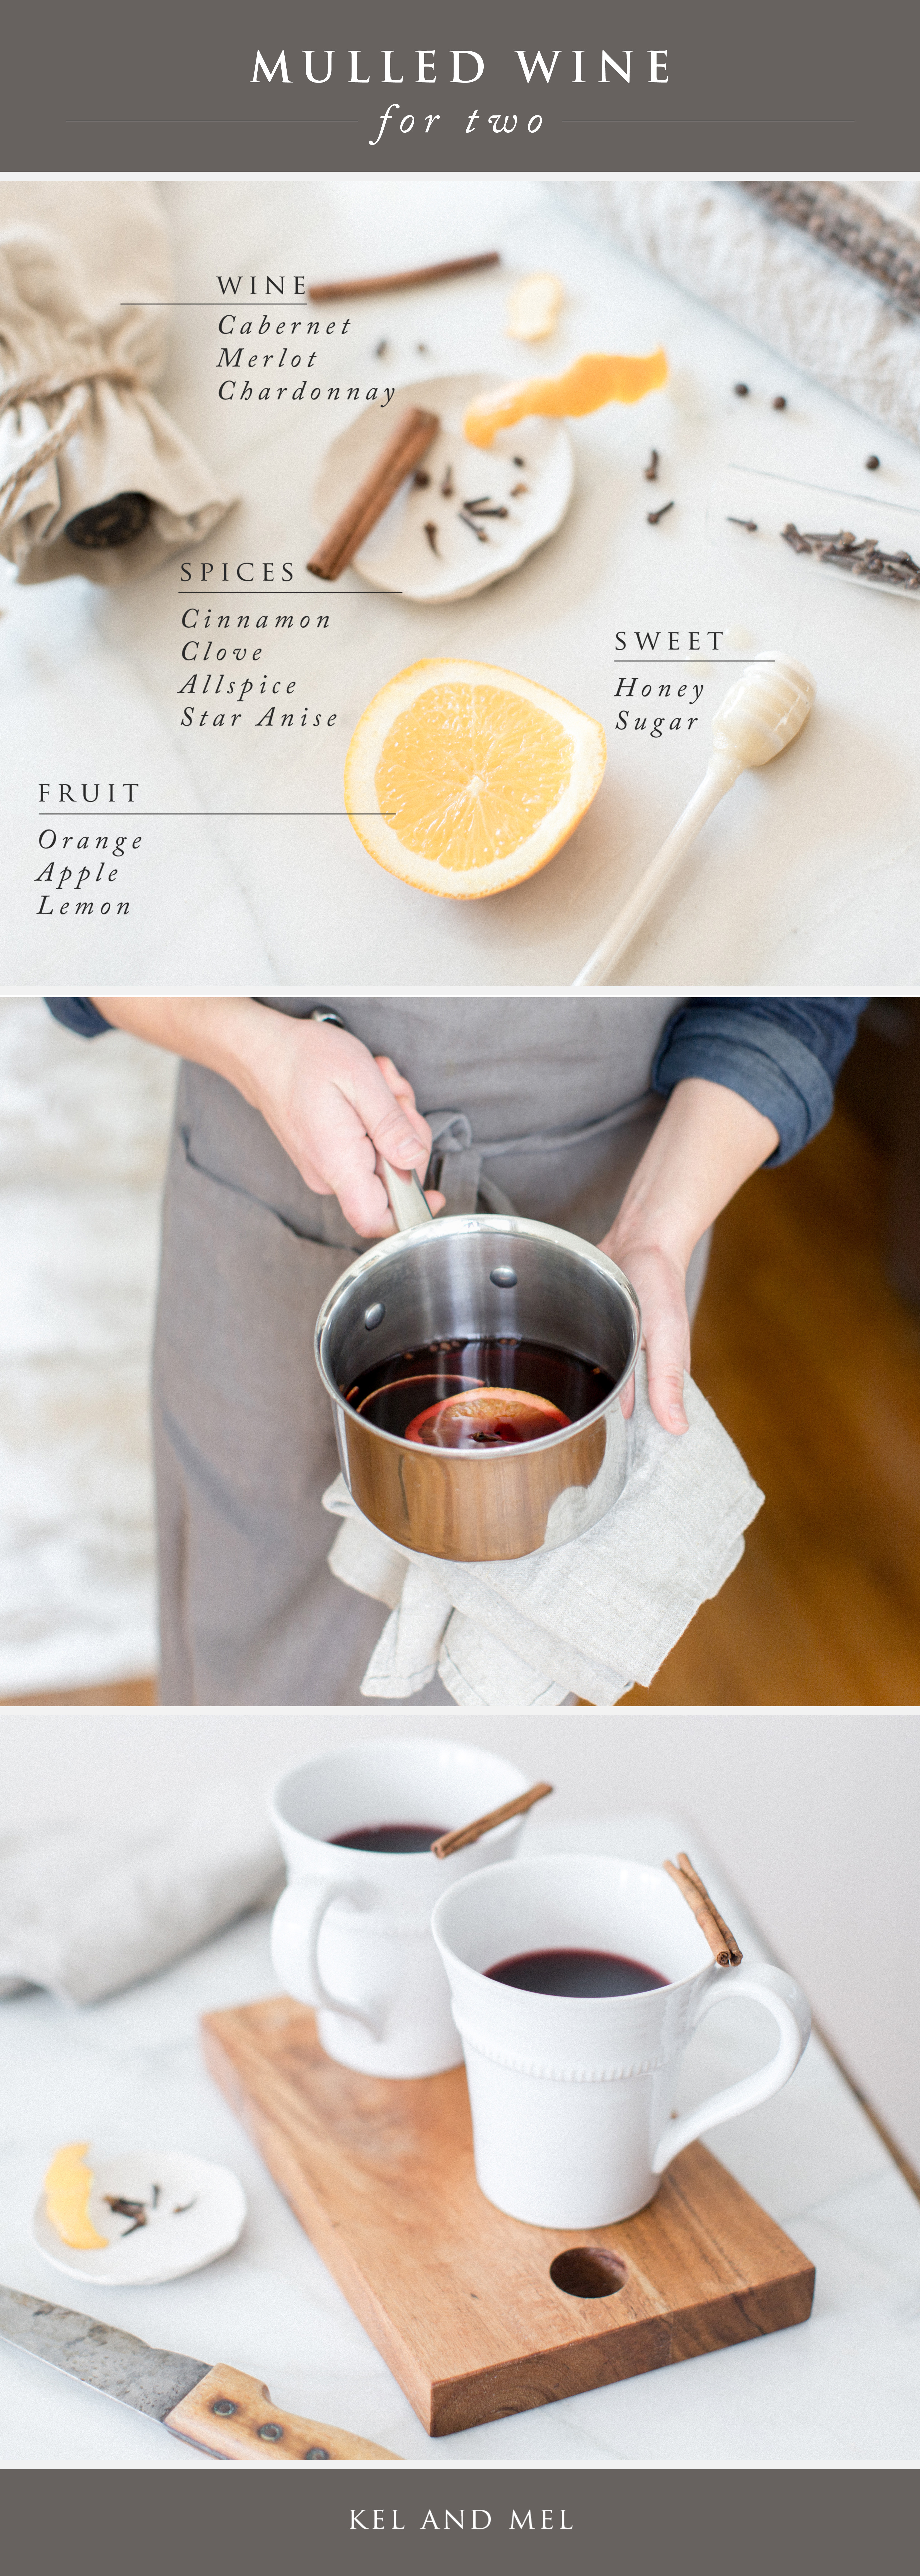 kel and mel, date night design, intentional marriage, mulled wine recipe